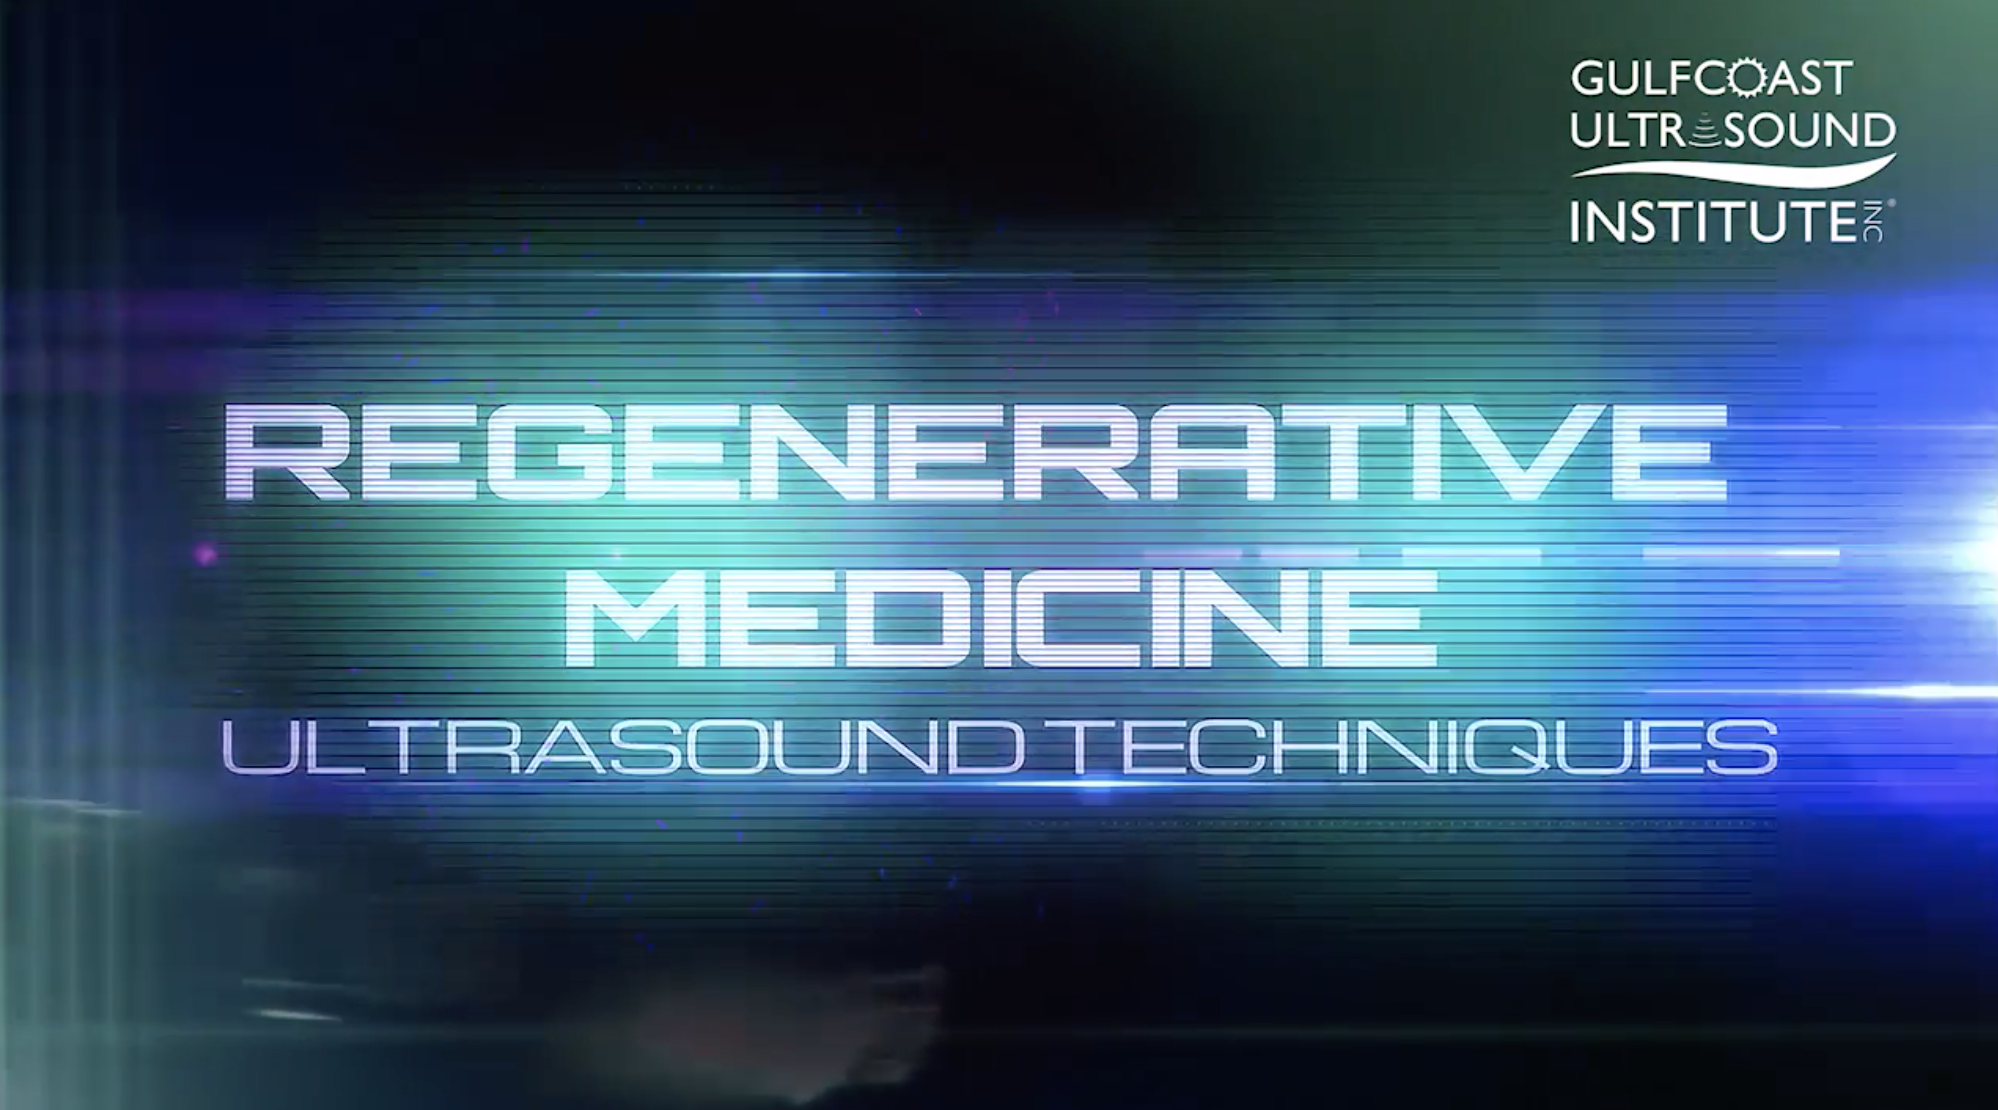 What can Regenerative Medicine be used for?